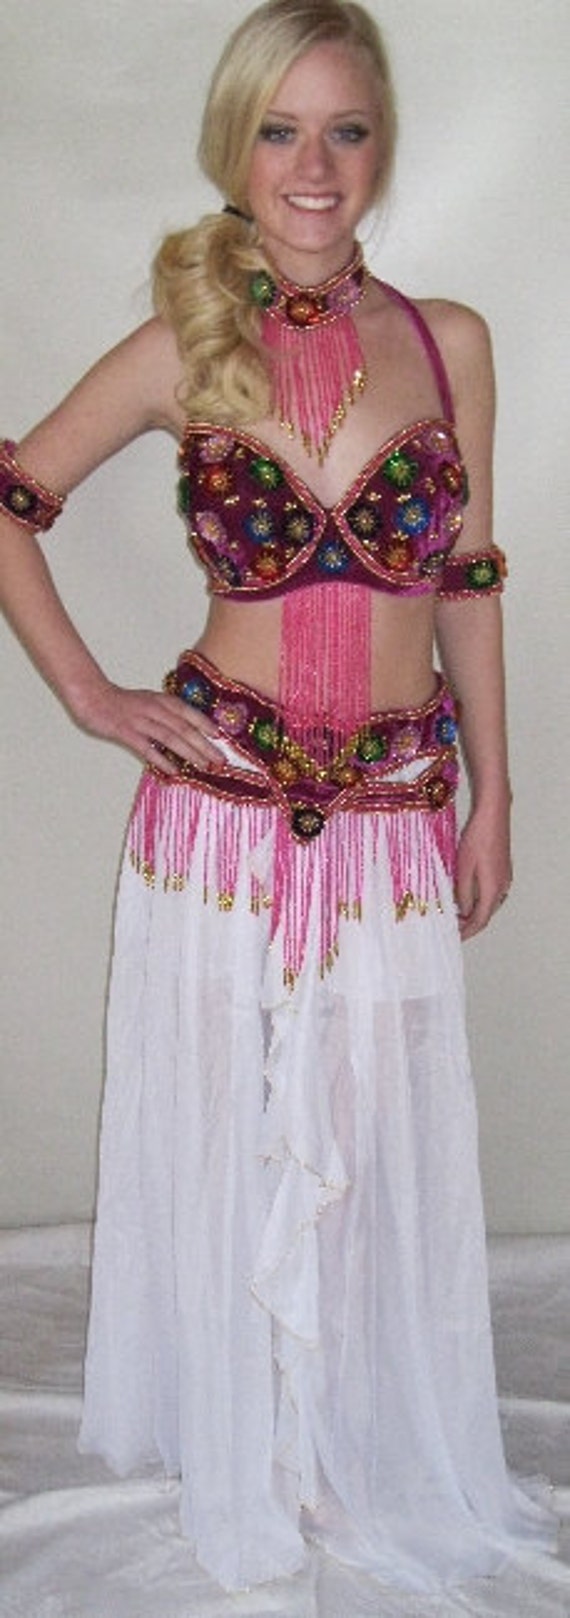 Floral Lace Tribal Belly Dance Clothing Studded Plus Size 3-piece